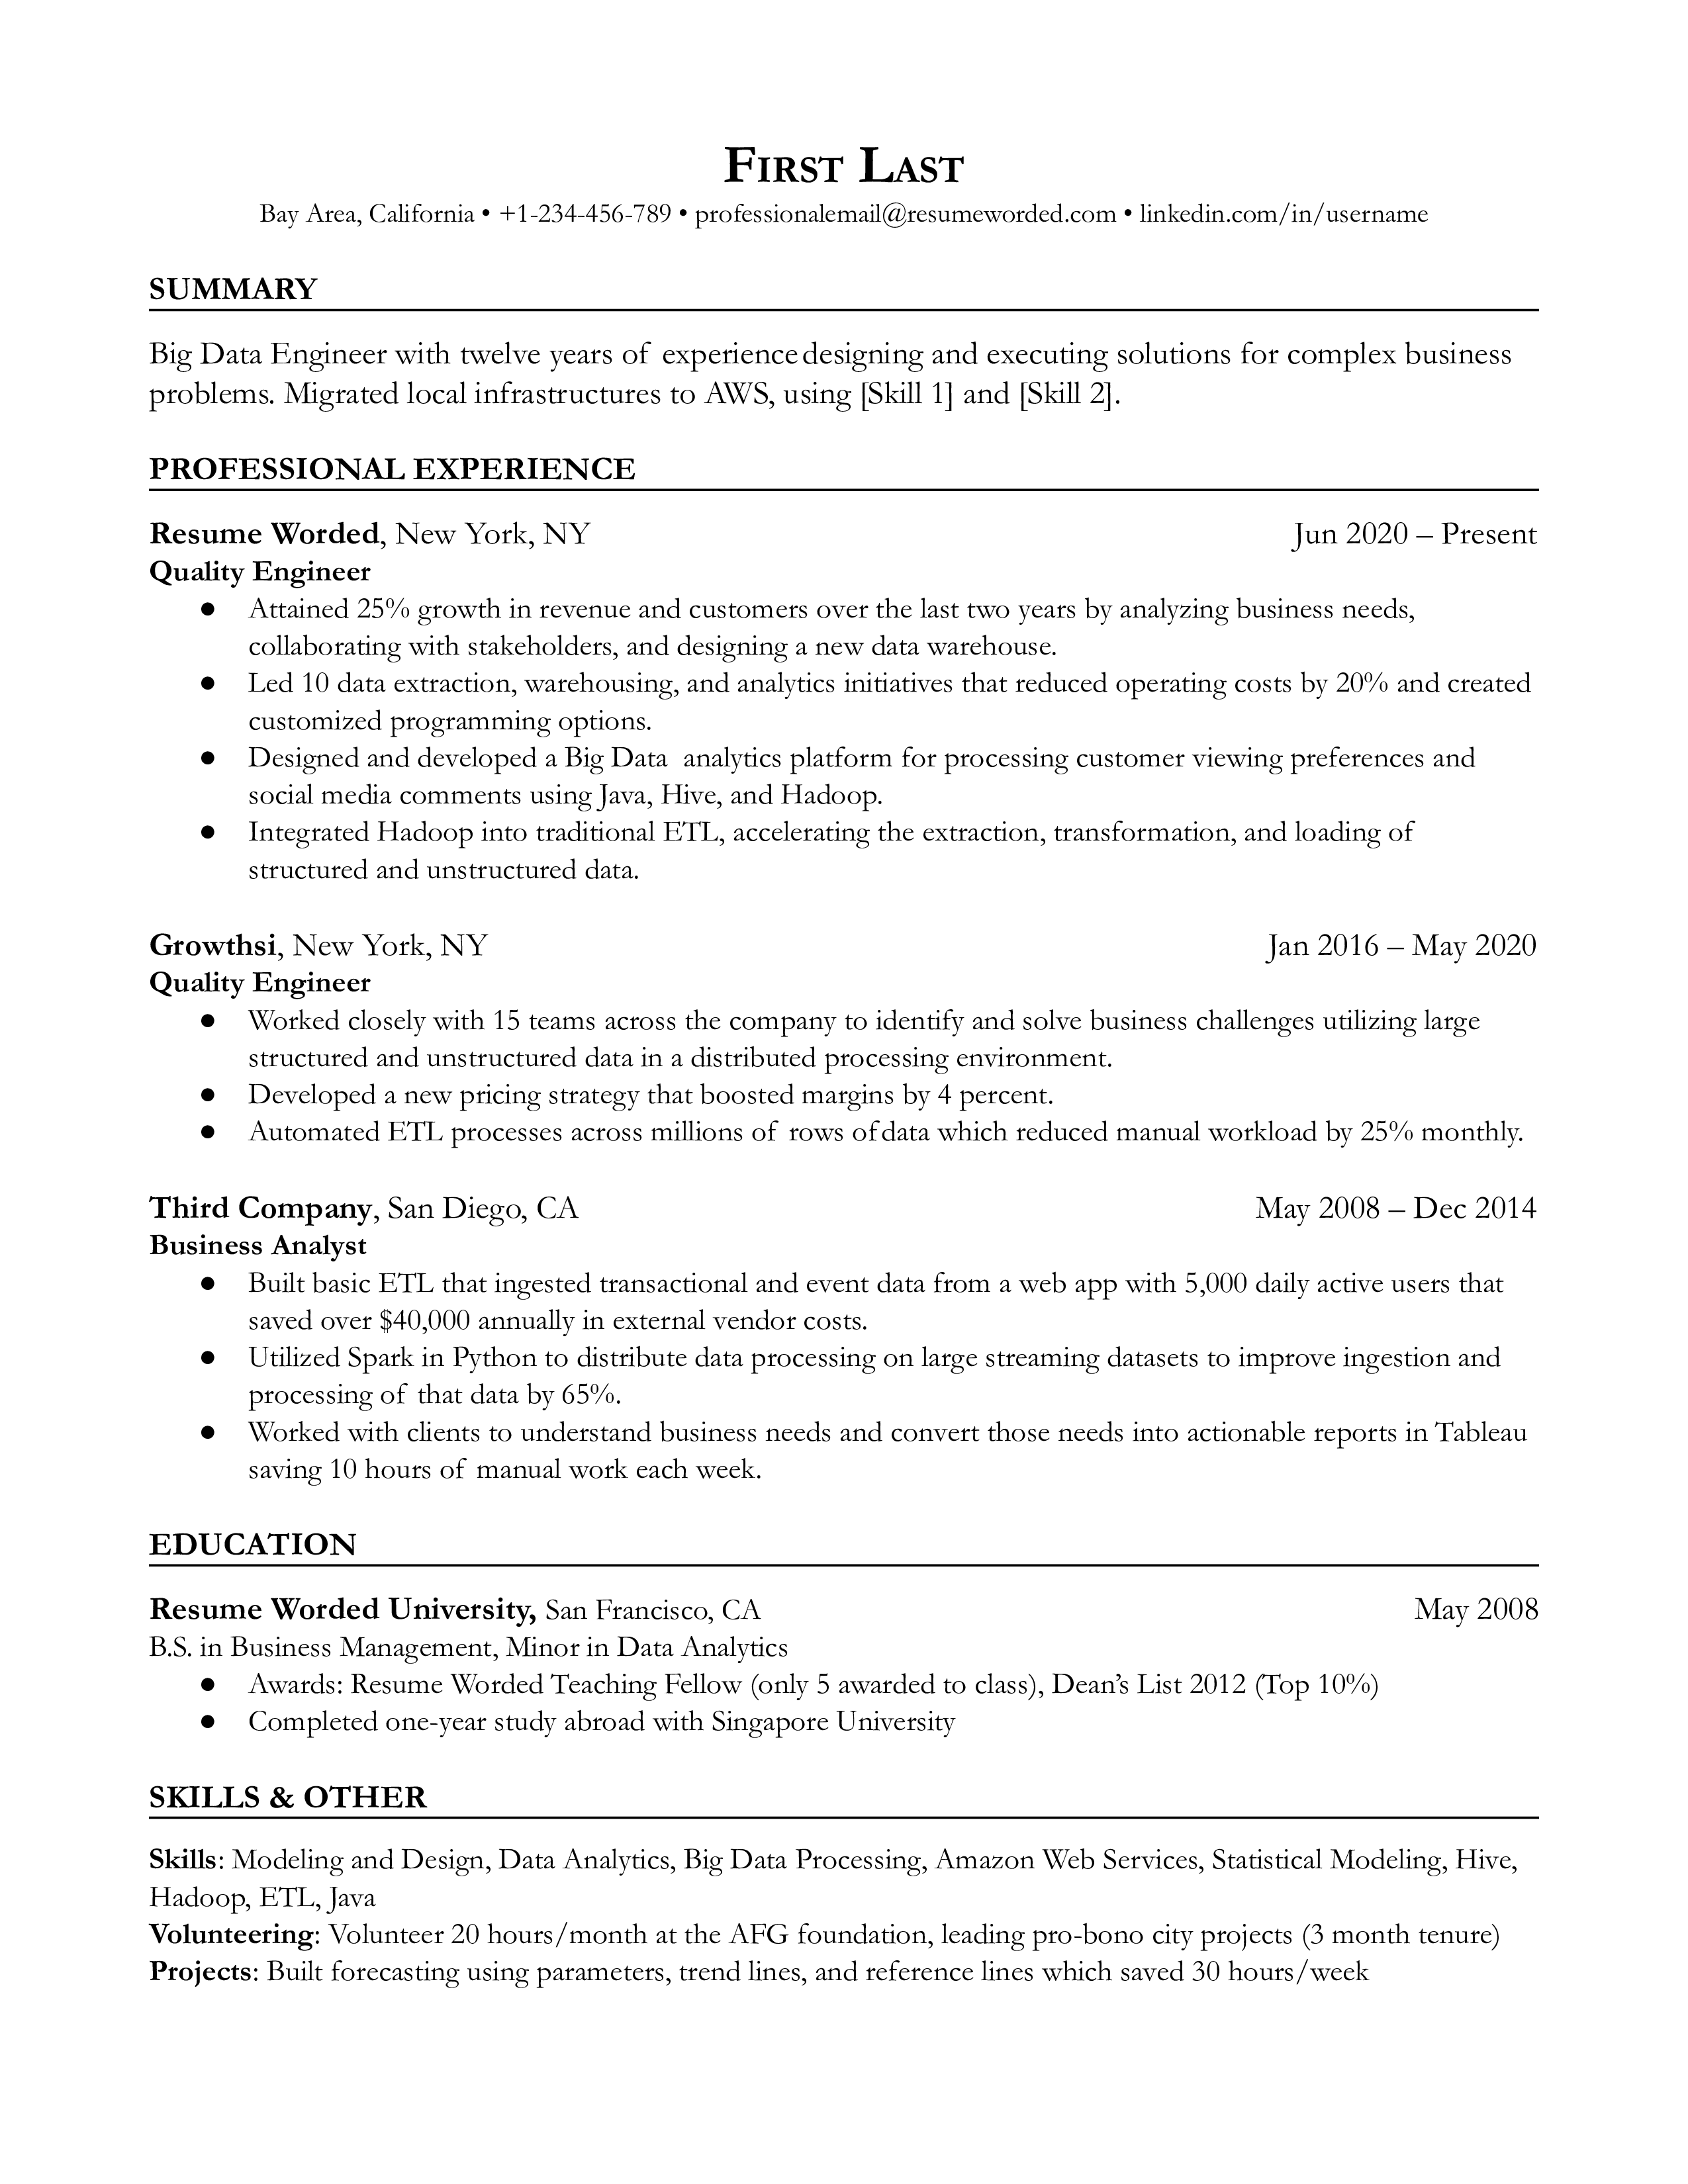 A CV detailing the skills, experiences, and impacts of a Big Data Engineer.